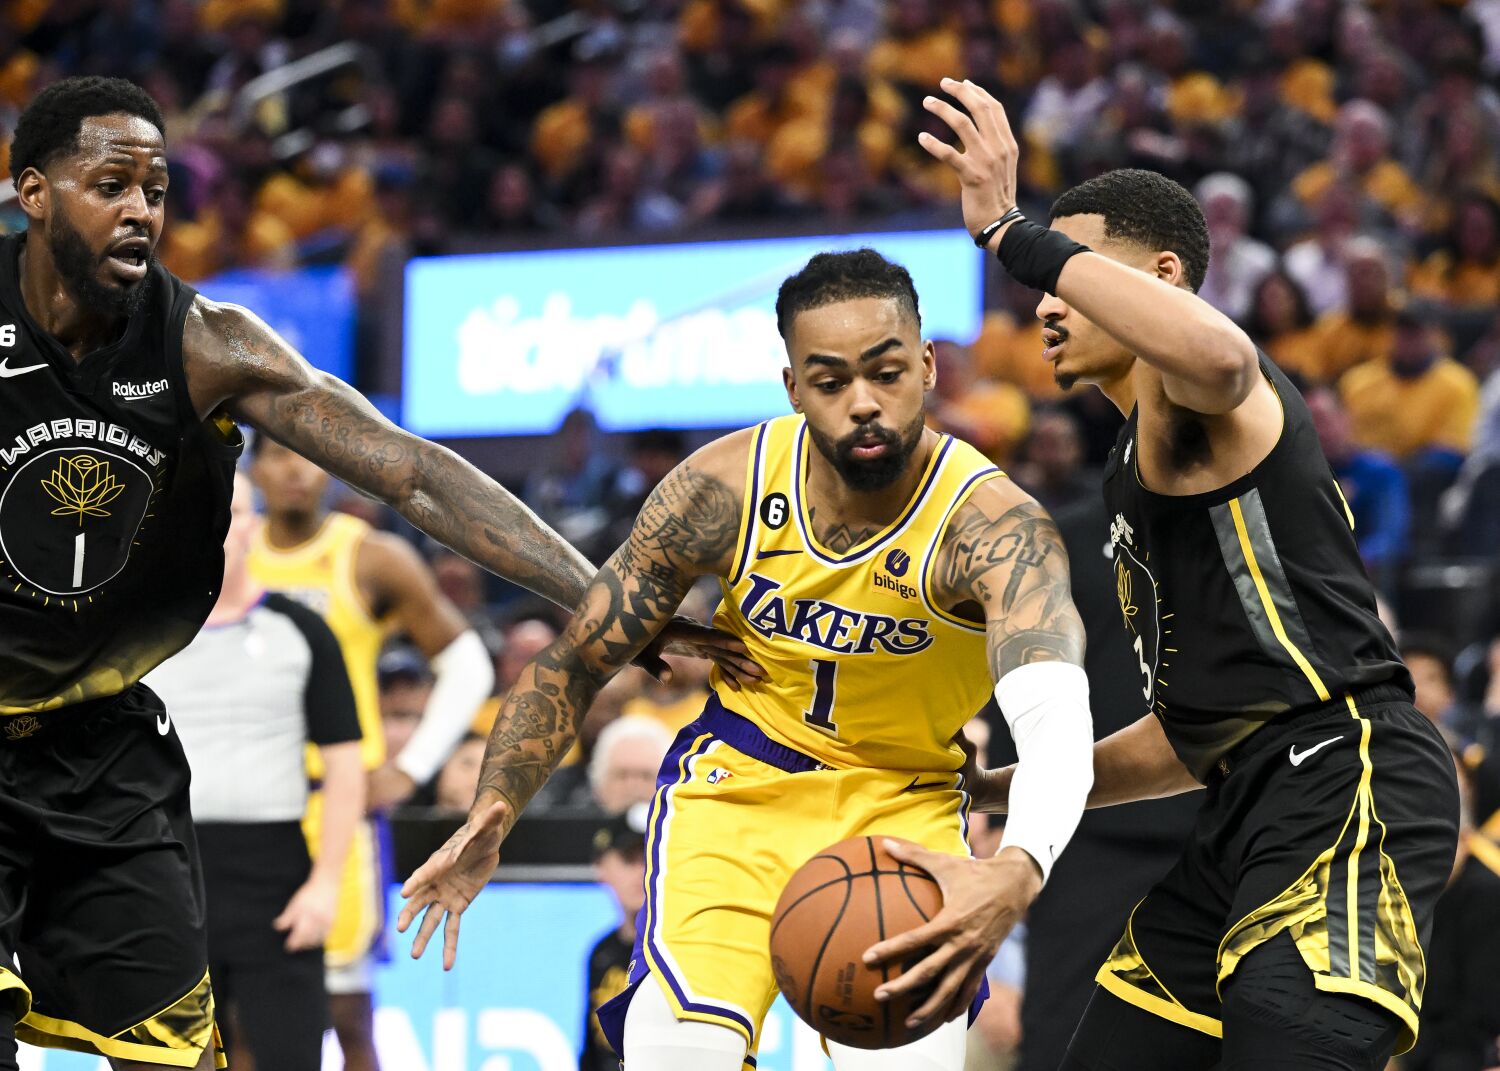 Lakers nearly finished building around core with Austin Reaves, D'Angelo Russell deals